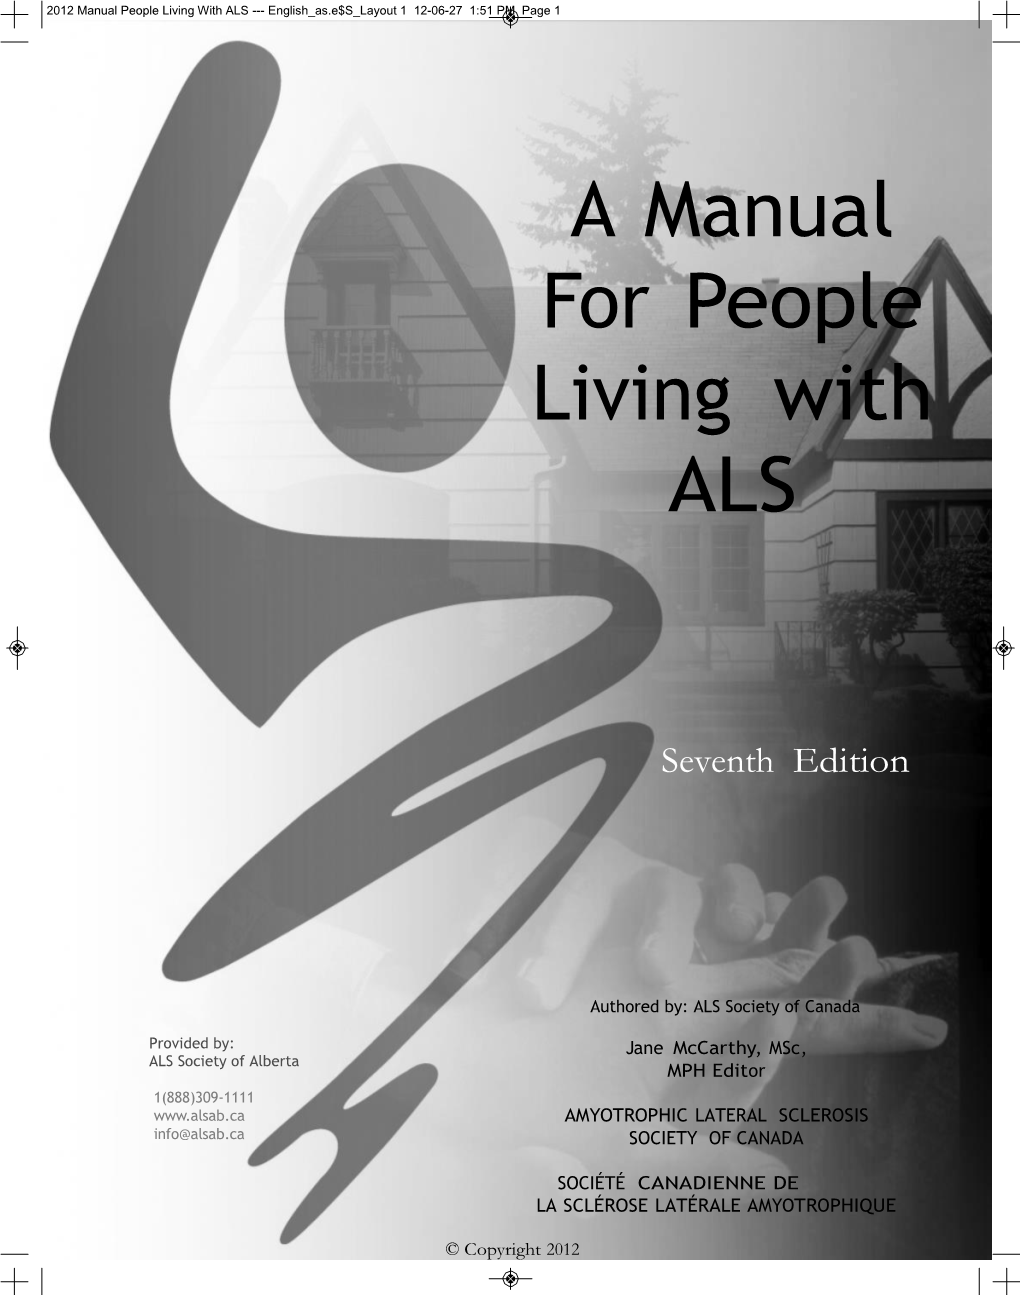 A Manual for People Living with ALS